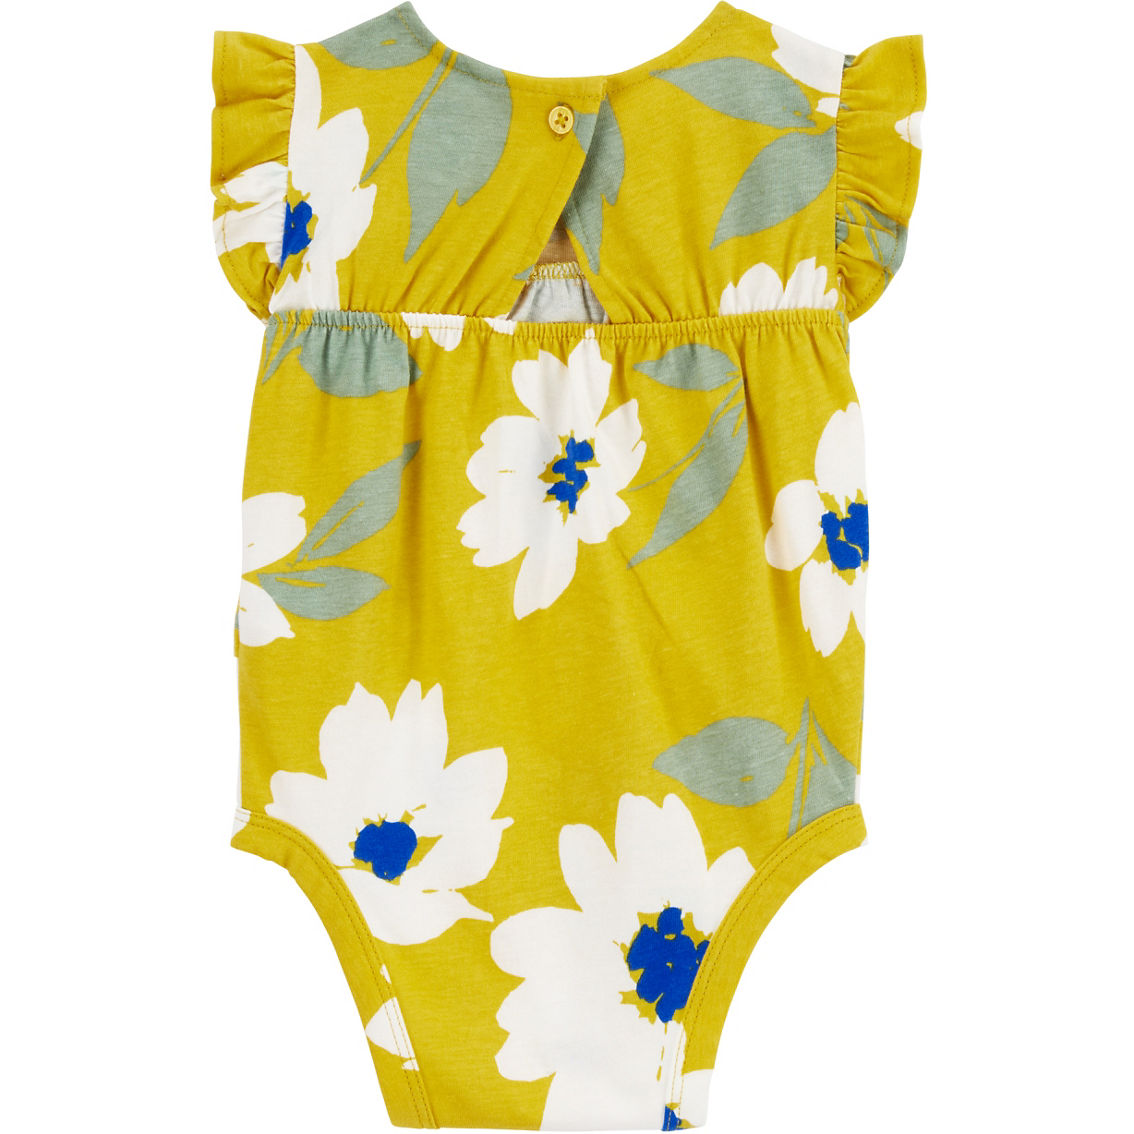 Carter's Baby Girls Floral Bodysuit and Pants 2 pc. Set - Image 2 of 2